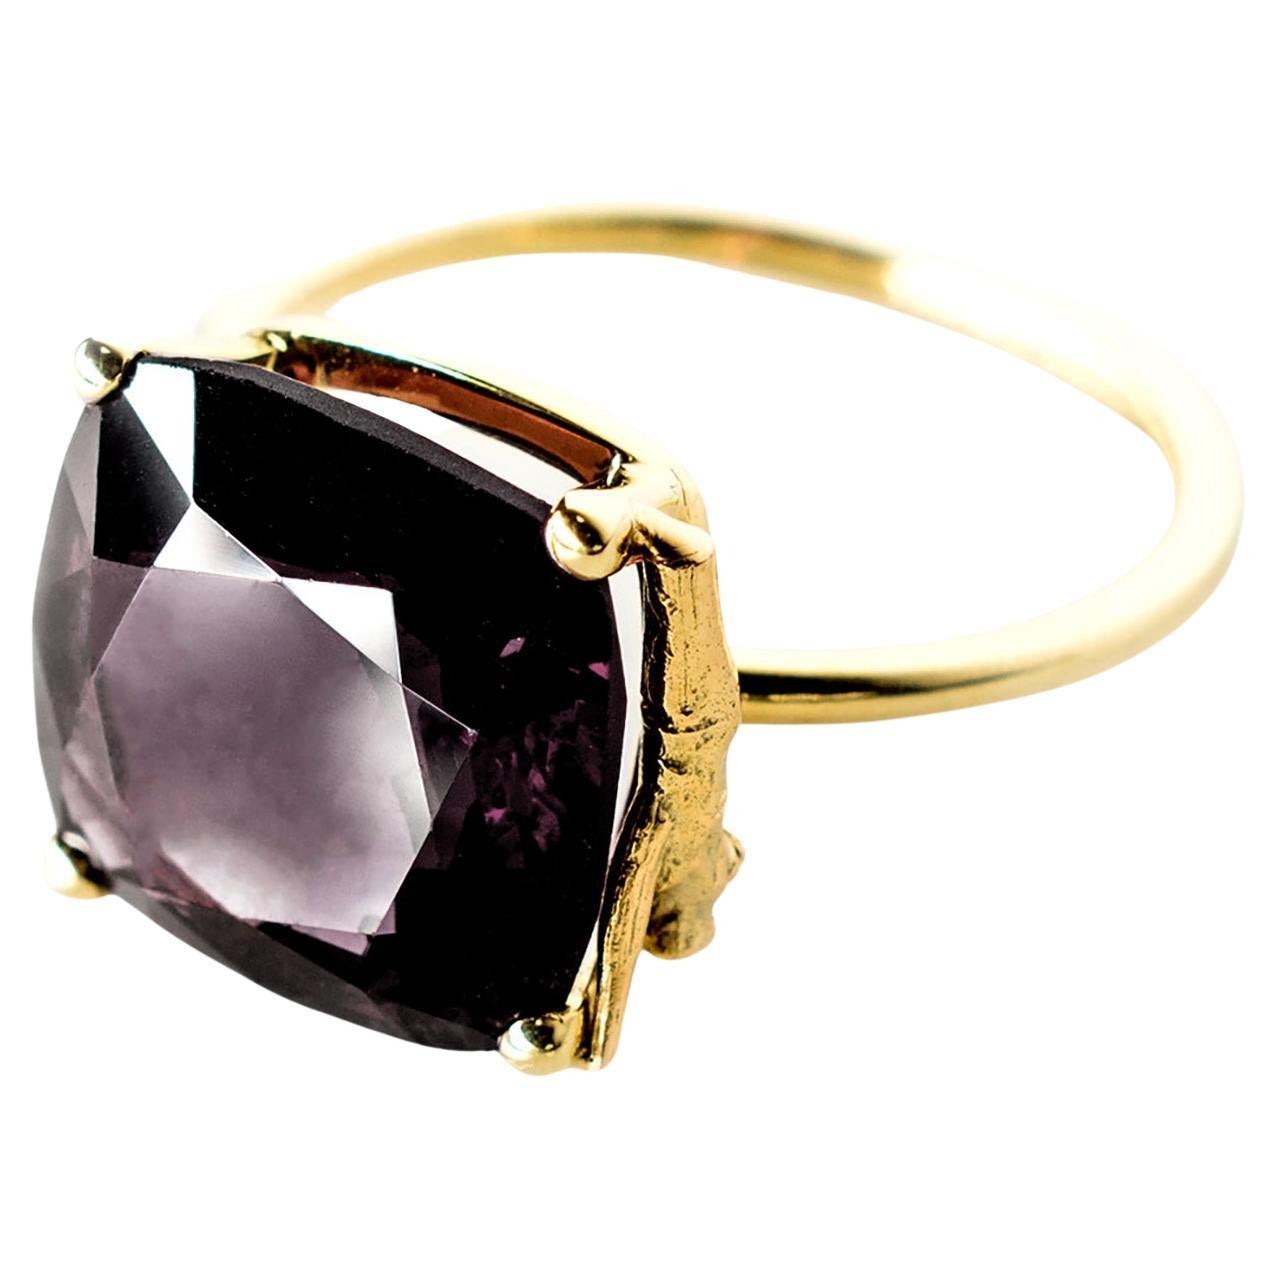 This ring is made of 18-karat rose gold and features a cushion storm color spinel. The size of the ring can be customized to fit you perfectly.

Additionally, the ring can be ordered in 18-karat yellow, rose, or white gold with spinels in other